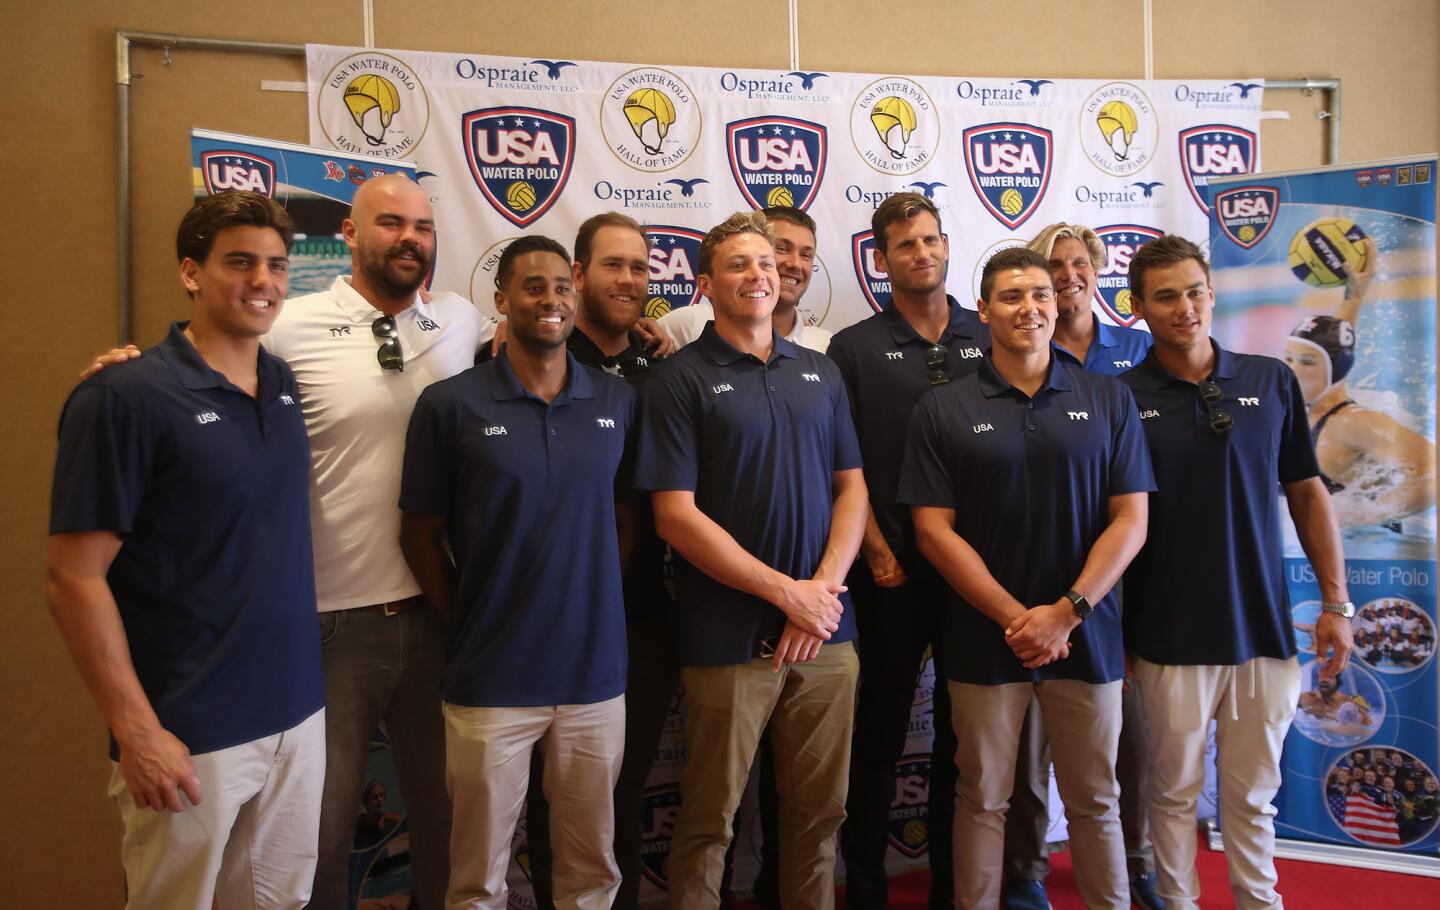 2018 USA Water Polo Hall of Fame Inductions